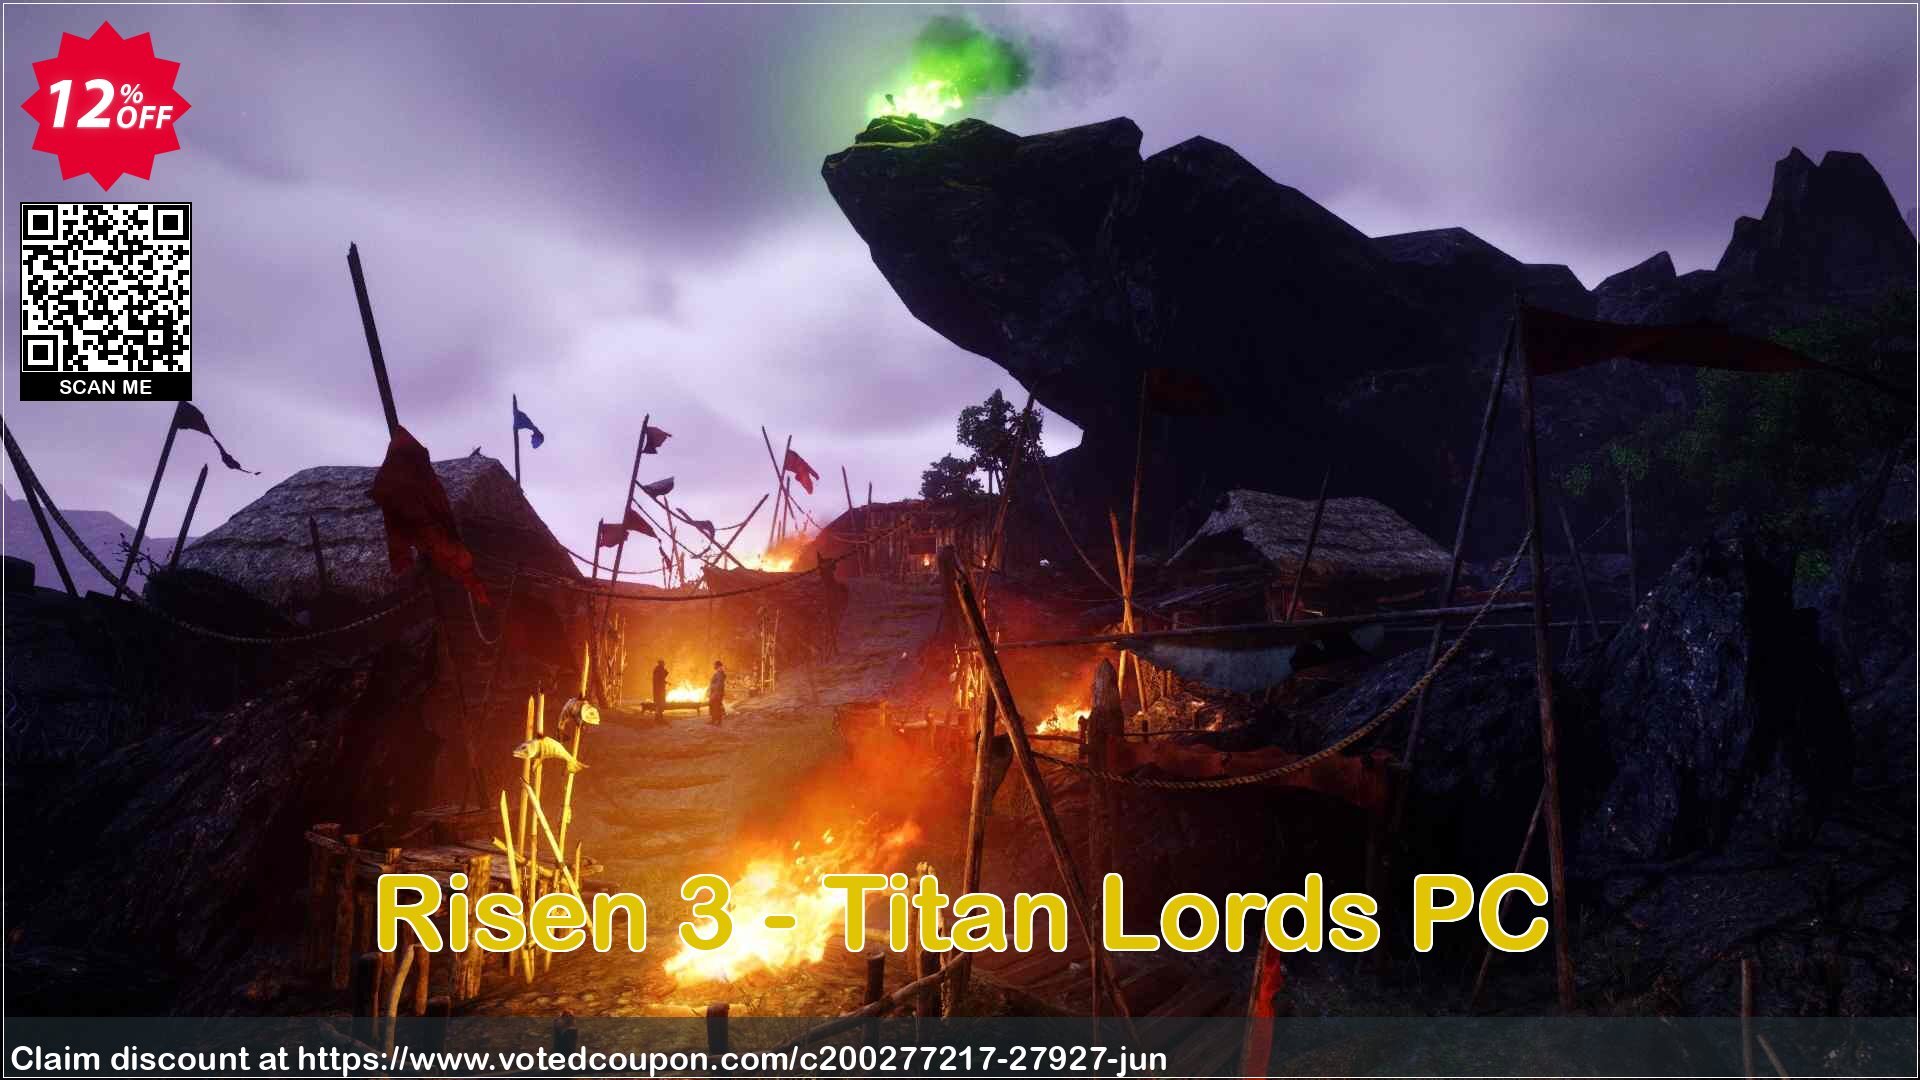 Risen 3 - Titan Lords PC Coupon Code May 2024, 12% OFF - VotedCoupon